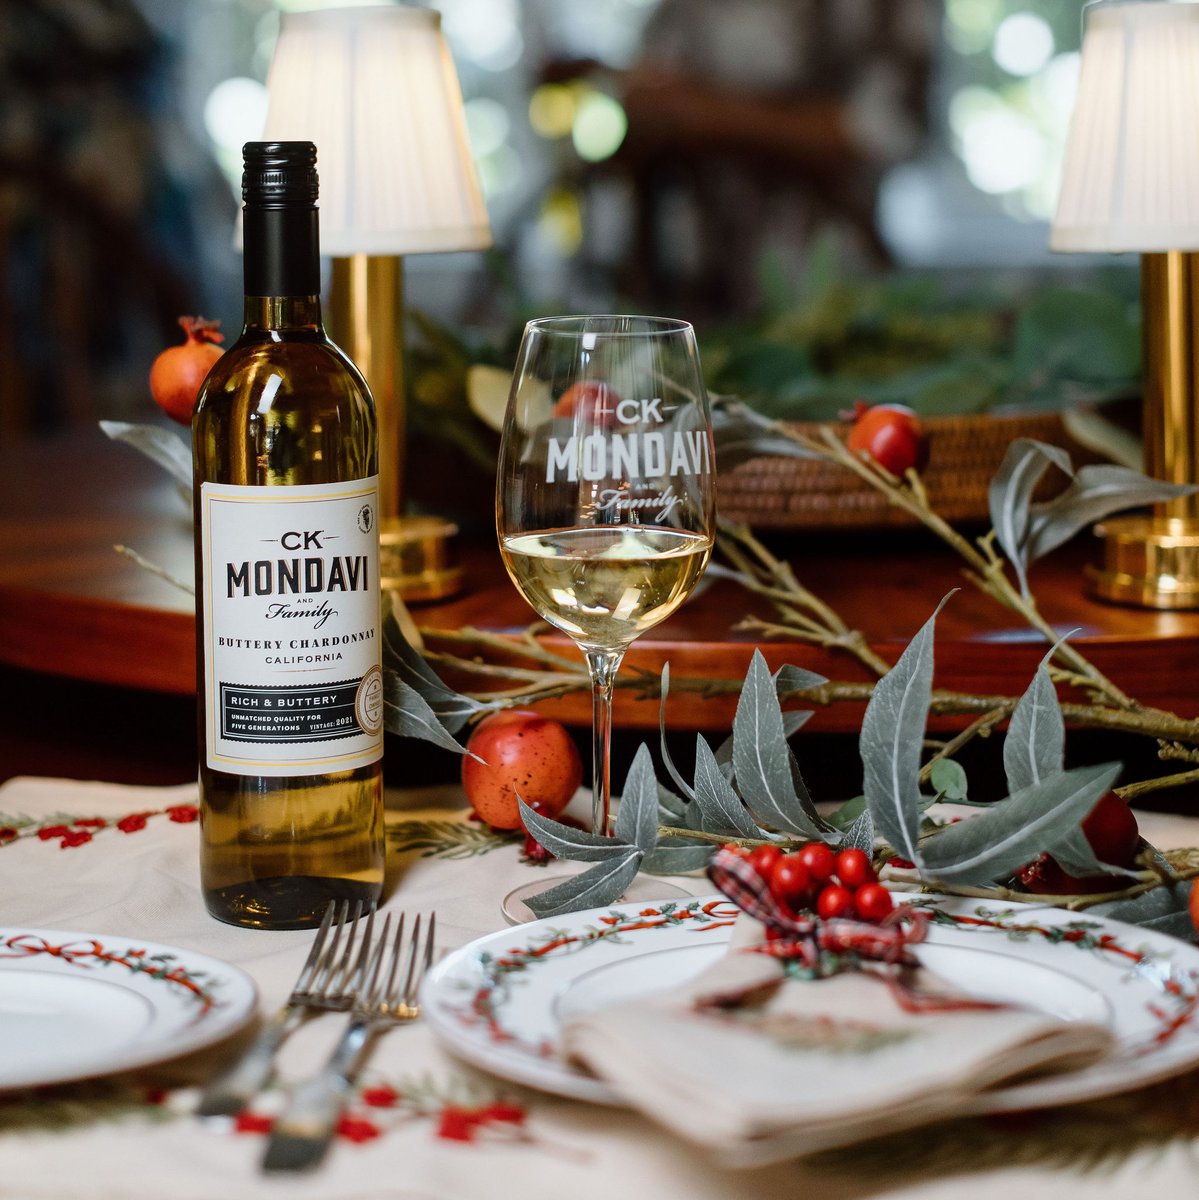 May your day be filled with love, laughter, and the joy of shared moments. We're grateful to have you as part of our CK Mondavi family, and we wish you a holiday season that's as rich and fulfilling as our wines. Cheers to a season of warmth and togetherness!